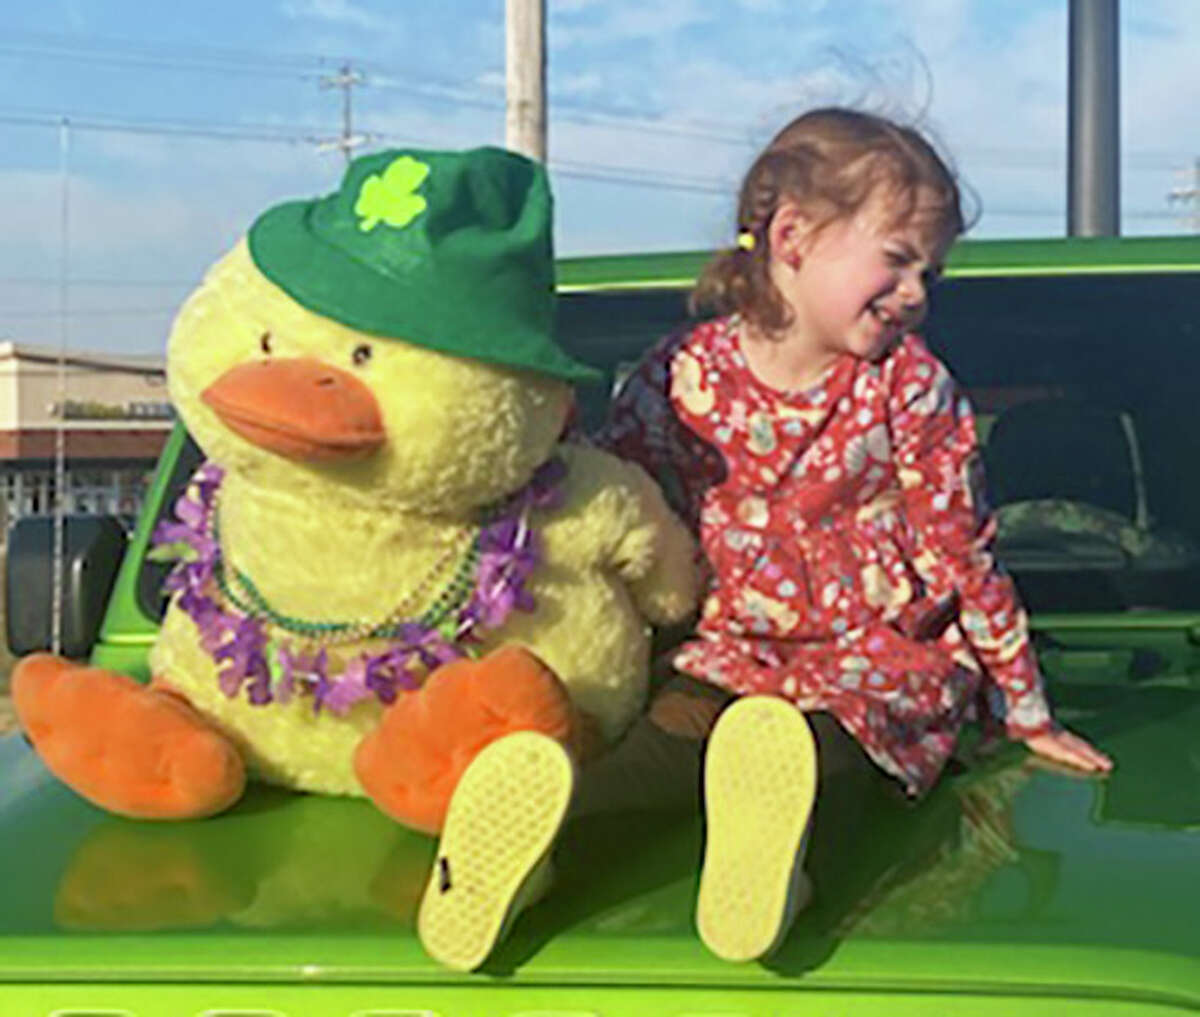 Mr. Vanderquack with a young fan during an appearance in the Alton area. The giant plush duck is the ambassador for a Jeep-related fundraising effort for St. Jude Children’s Research Hospital started by East Alton resident Lisa Unverzagt.